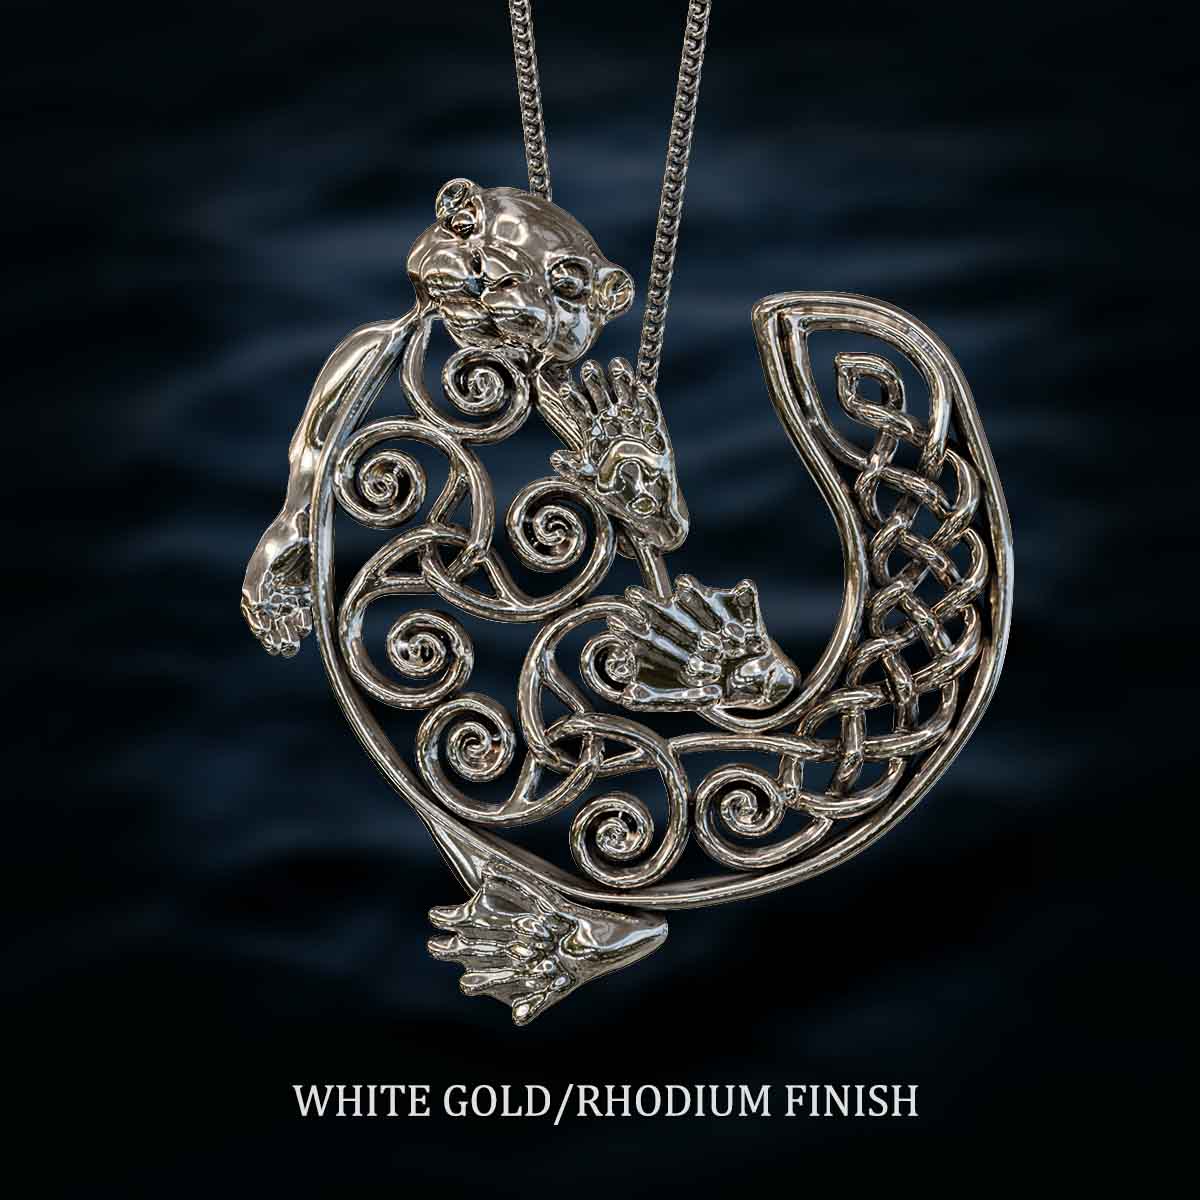 White-Gold-Rhodium-Finish-Celtic-Otter-Pendant-Jewelry-For-Necklace